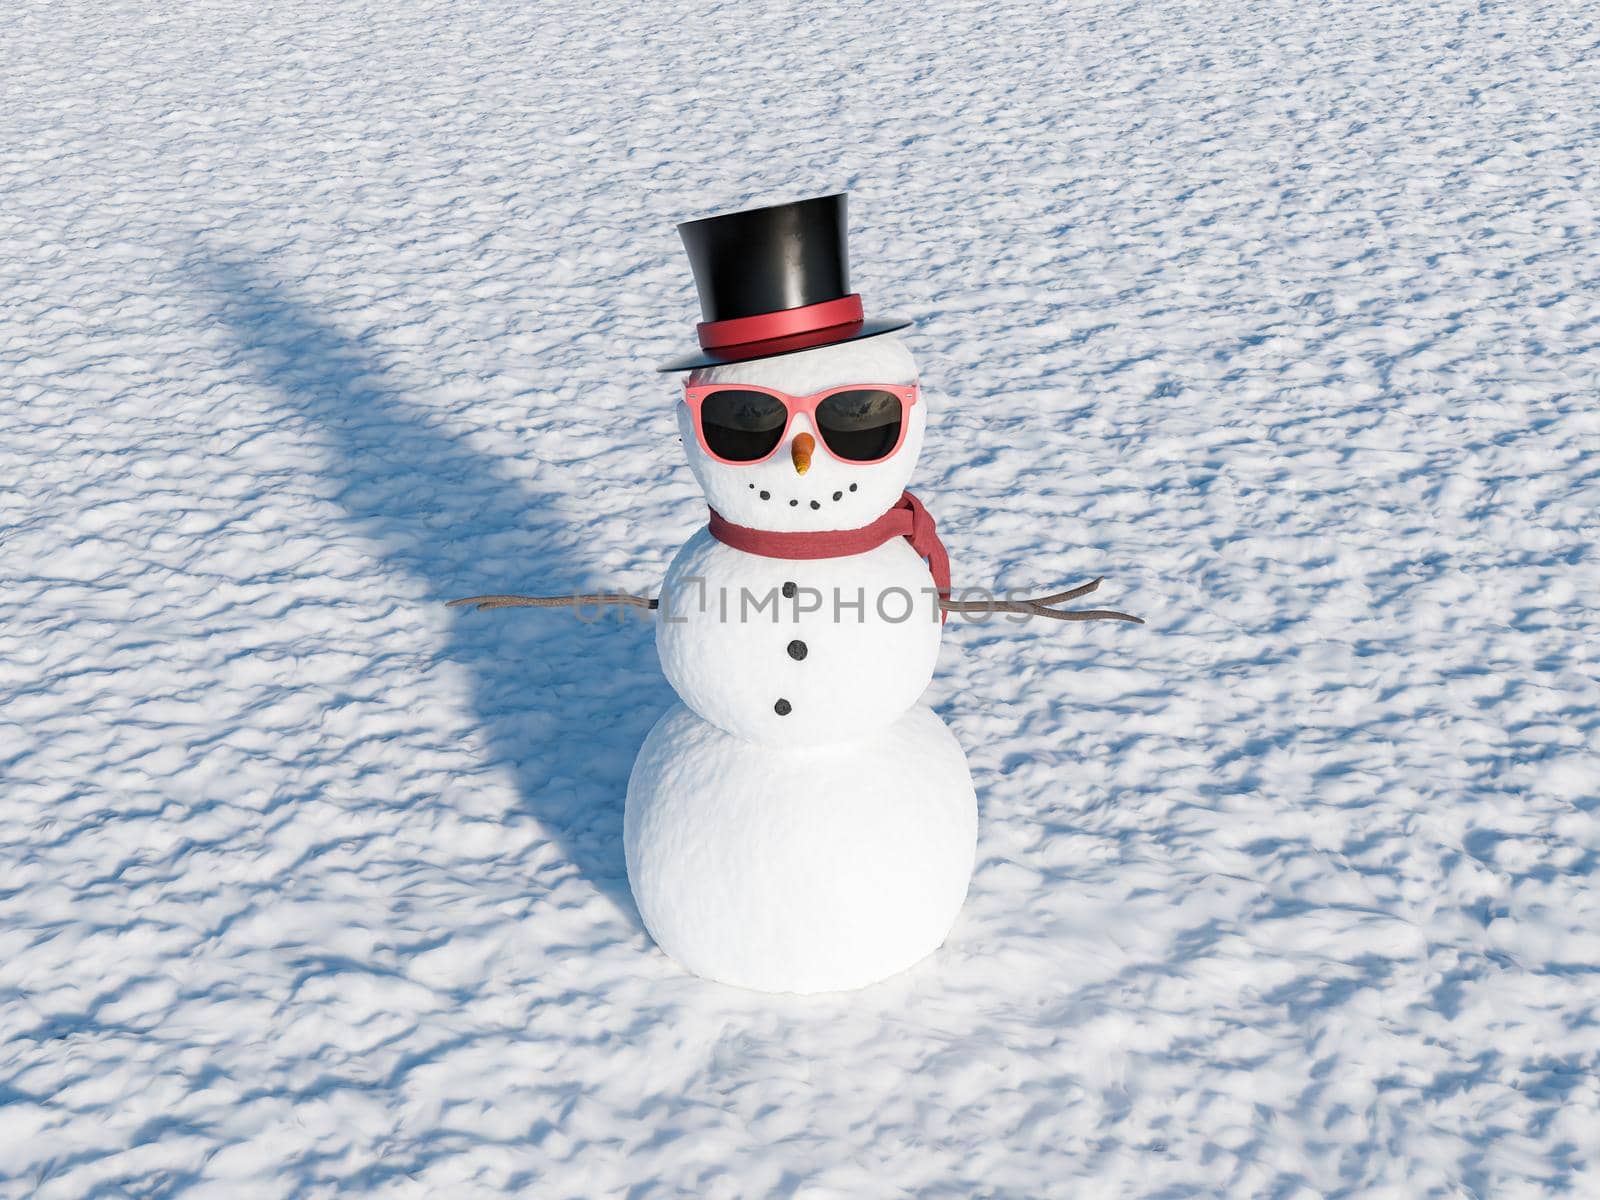 snowman with sunglasses, scarf and hat on snowy ground in daylight. 3d rendering